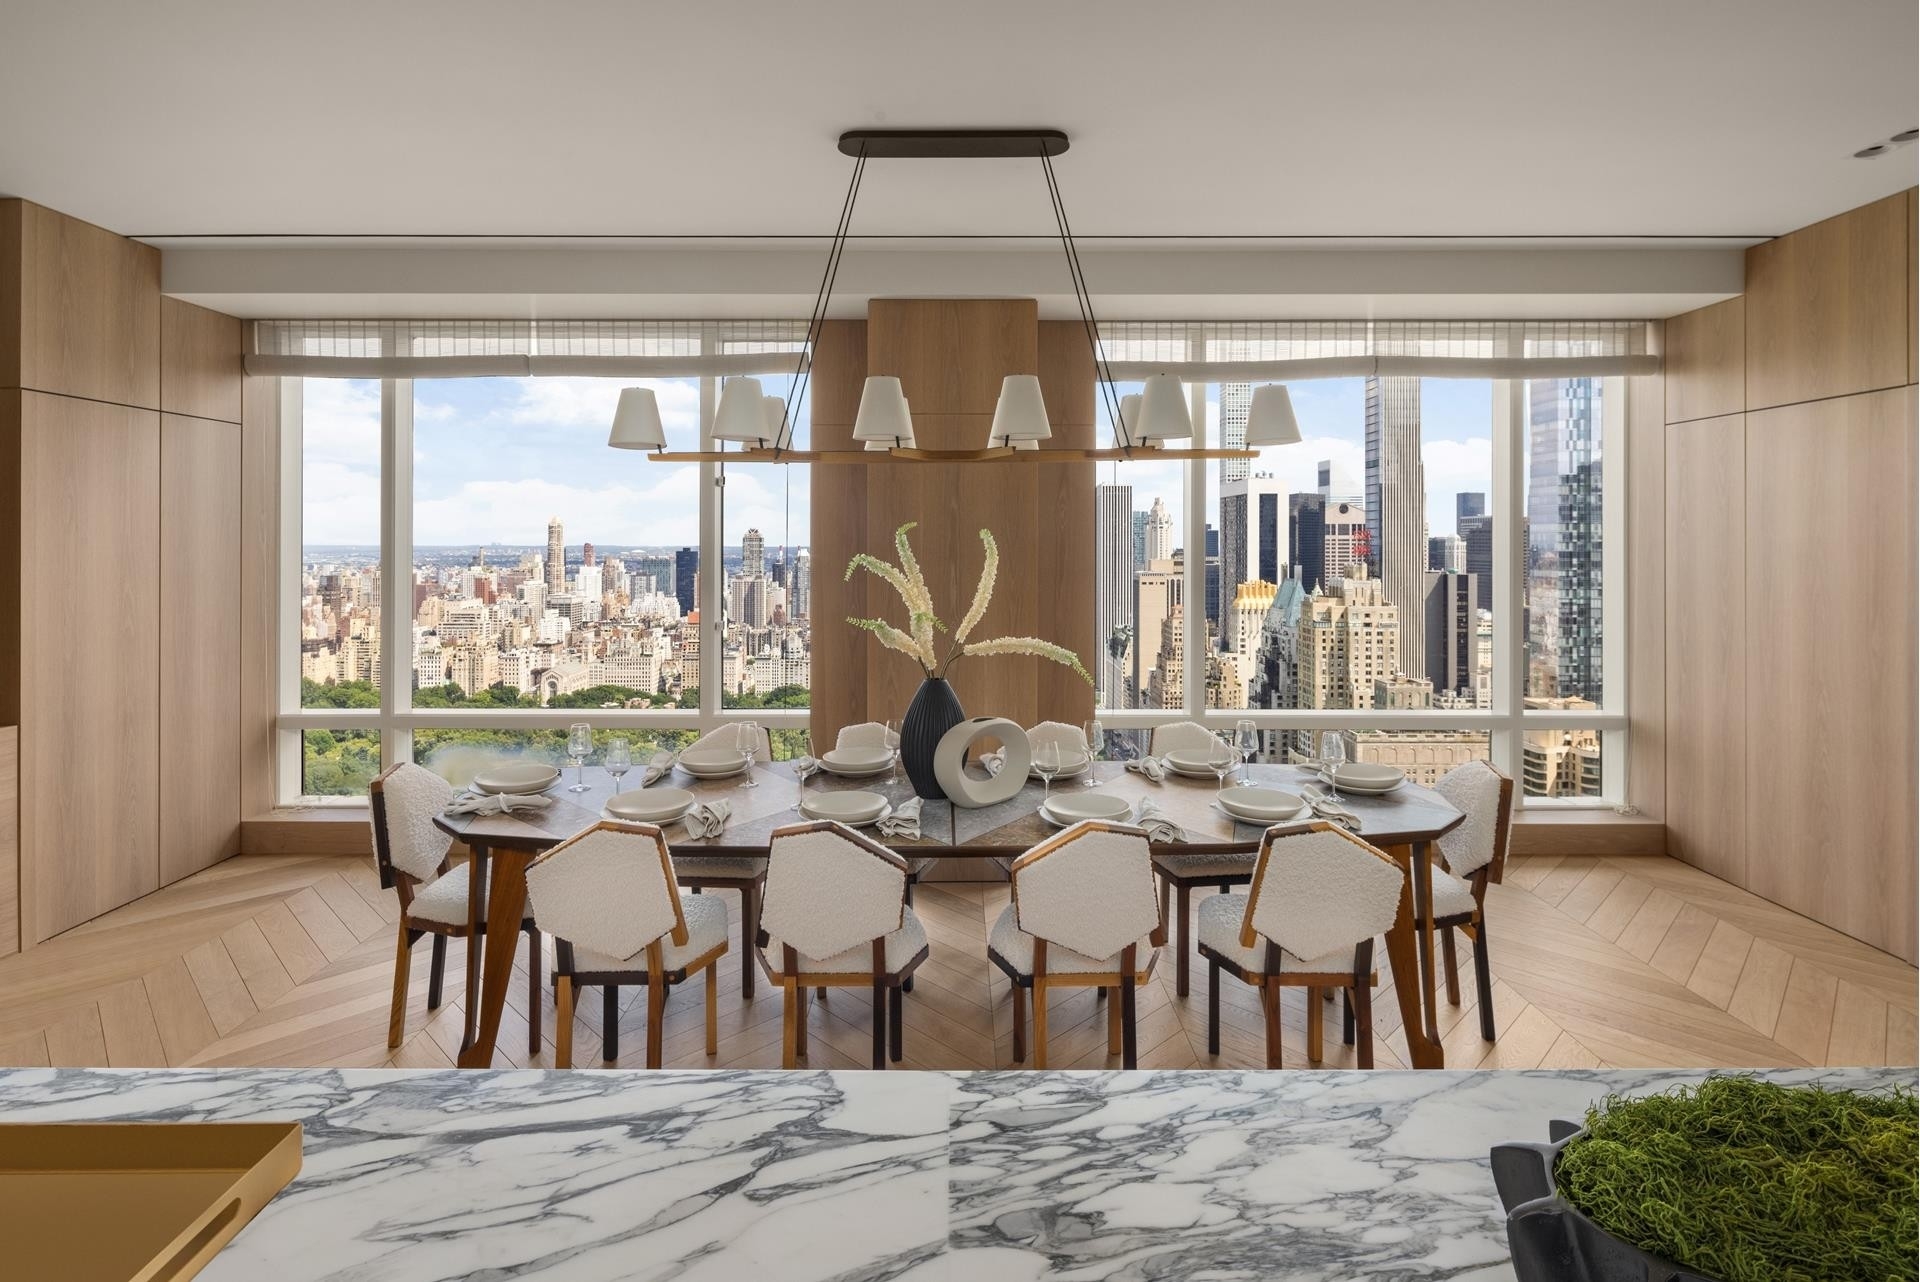 Property at One Central Park West, 1 CENTRAL PARK W, 47BC Lincoln Square, New York, New York 10023